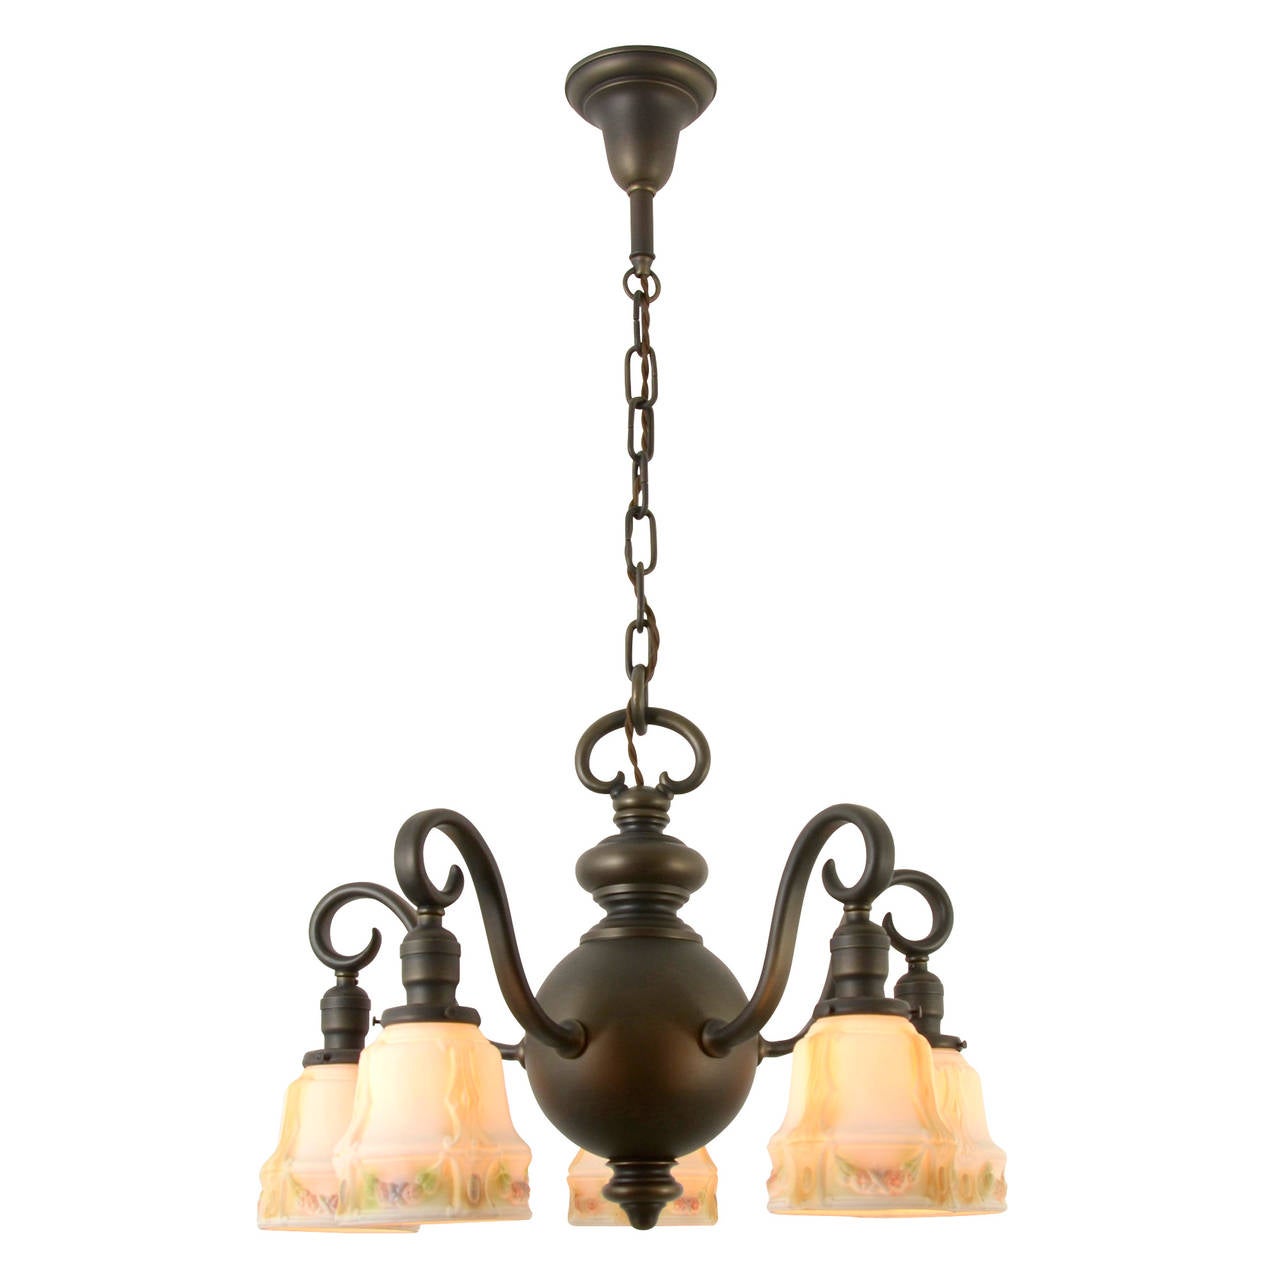 A little goes a long way with this remarkable Colonial Revival chandelier. Ornate without being ostentatious, design elements include a turned spherical body that terminates in a traditional finial and impressive swooping armbacks. The delicately